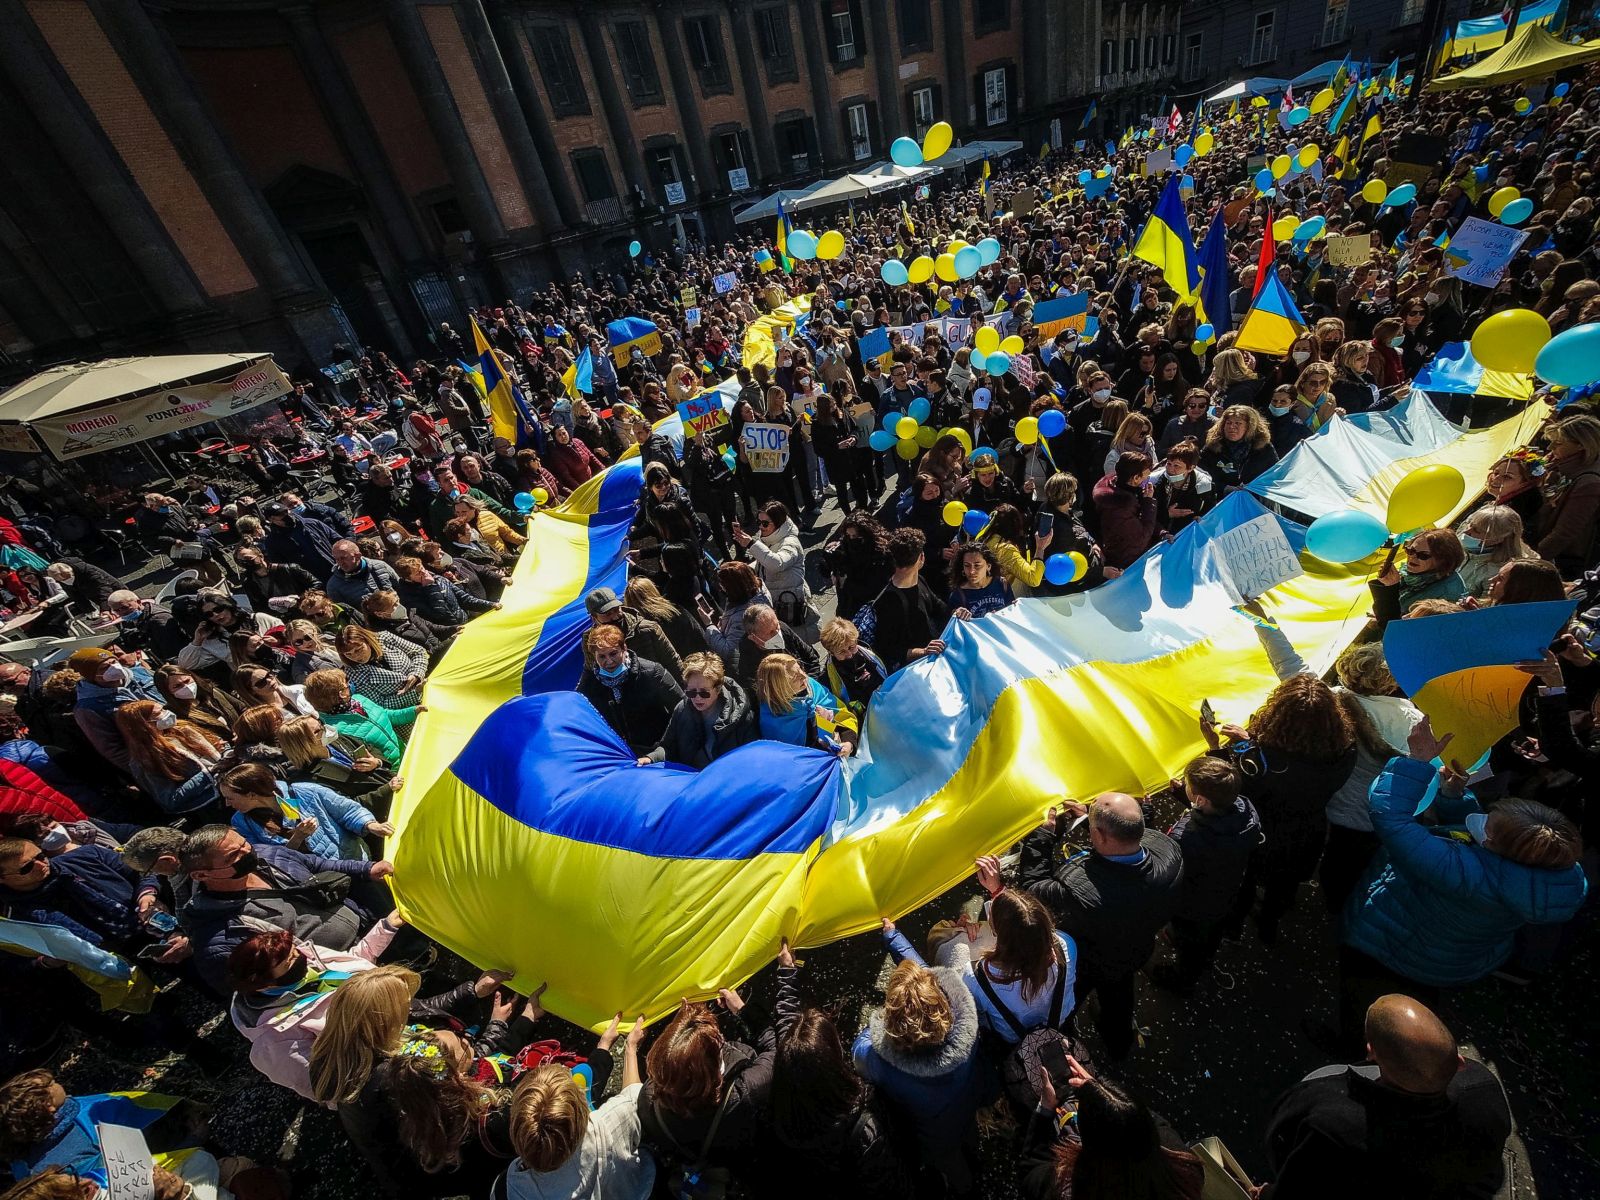 epa09788919 Ukrainian citizens and supporters demonstrate against the war in Ukraine at Piazza Dante in Naples, Italy, 27 February 2022. Russian troops entered Ukraine on 24 February prompting the country's president to declare martial law and triggering a series of announcements by Western countries to impose severe economic sanctions on Russia.  EPA/CESARE ABBATE